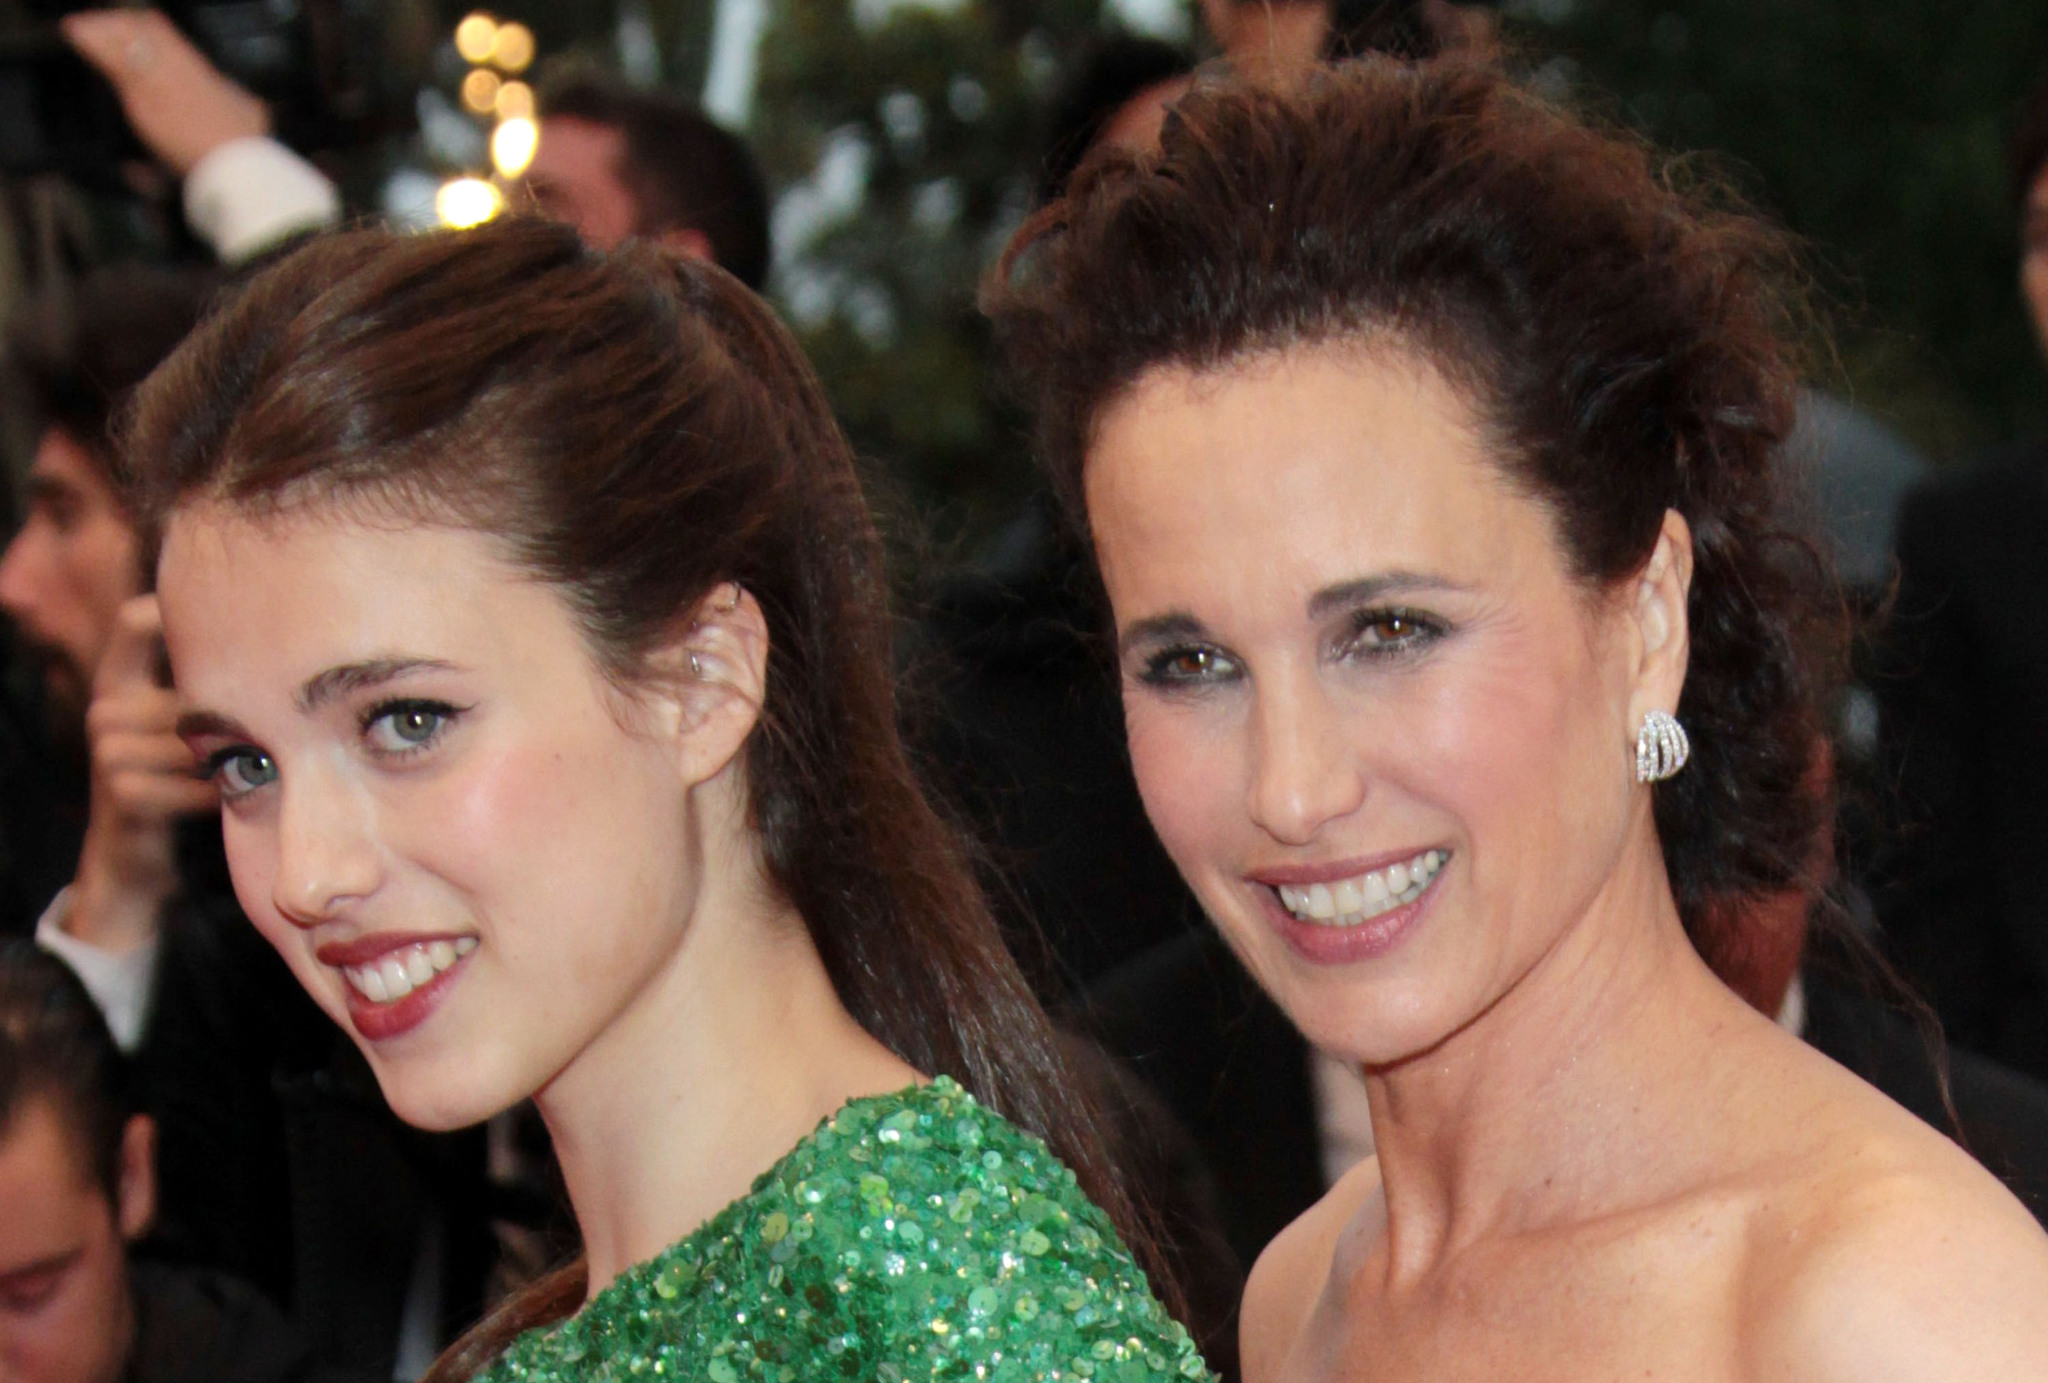 Andie MacDowell and Margaret Qualley at event of Tereses nuodeme (2012)